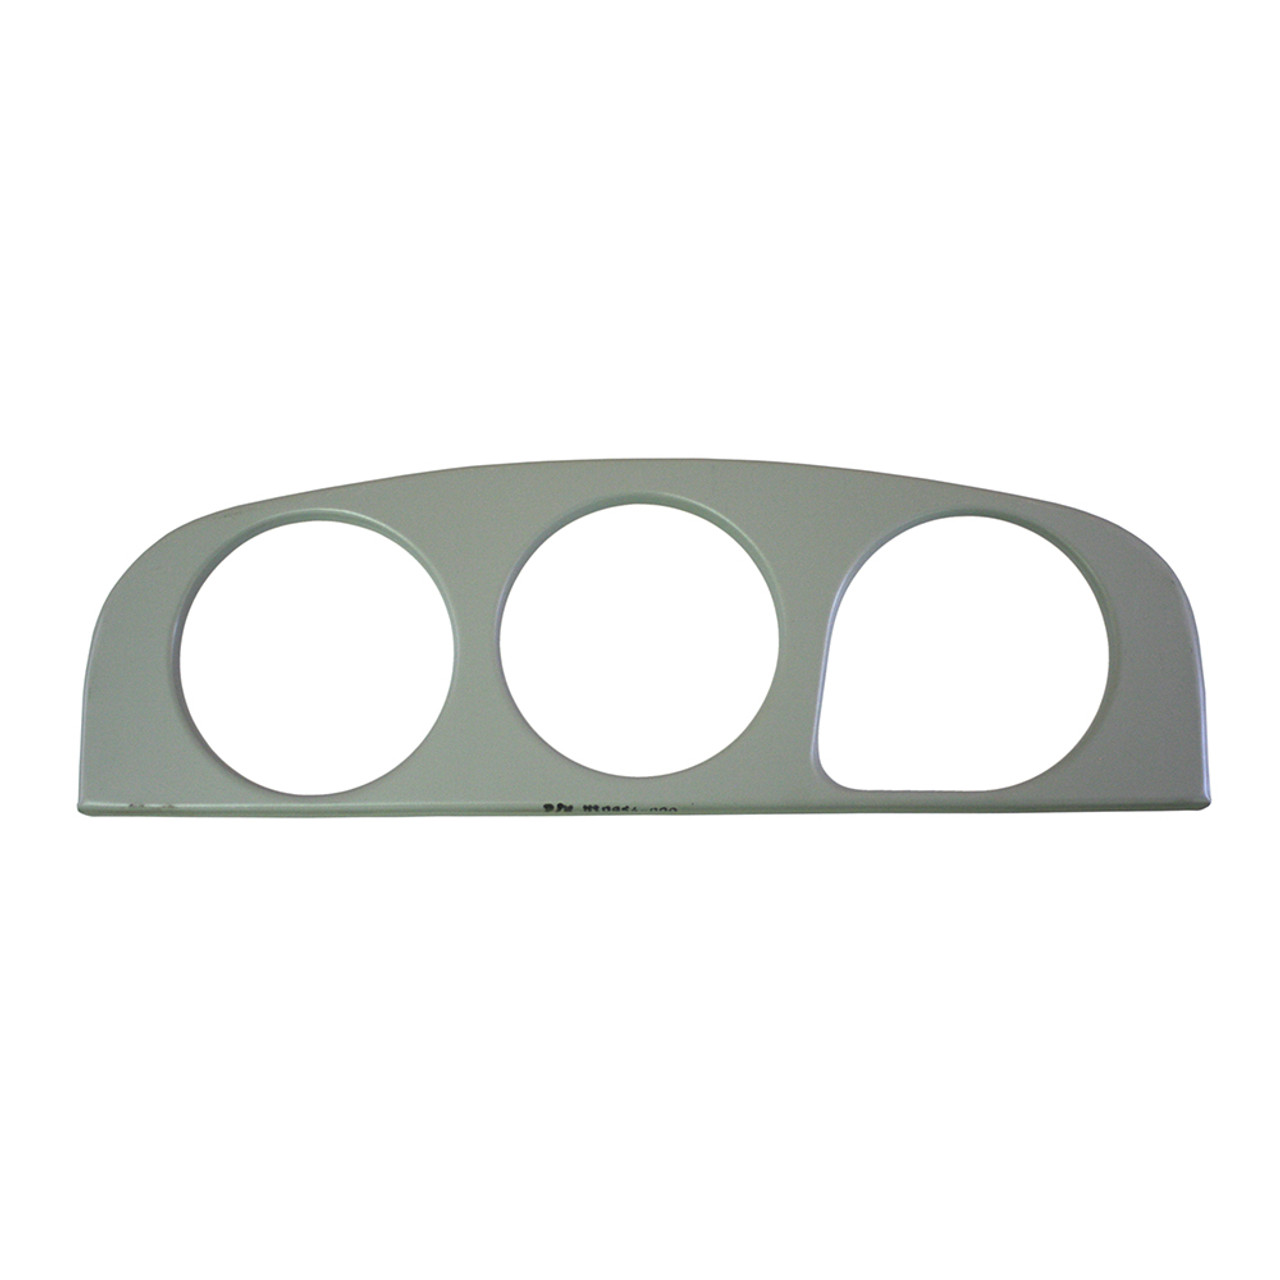 U10854-000   UNIVAIR INSTRUMENT PANEL TOP COVER - 3 HOLE - FITS PIPER